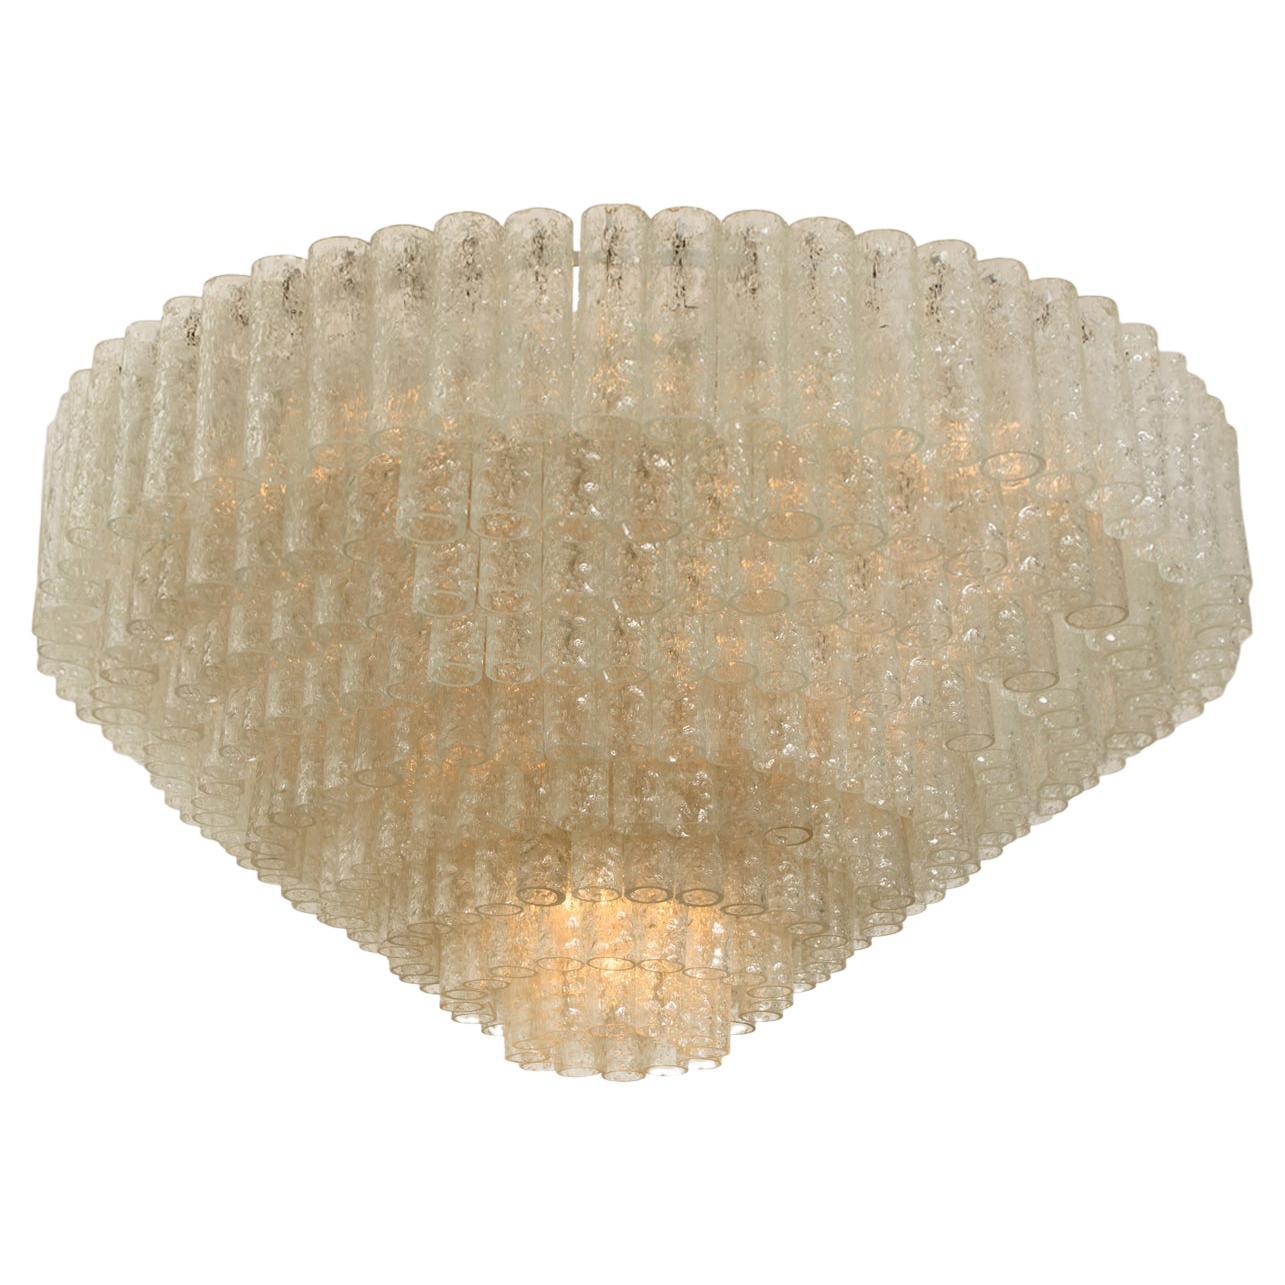 Exceptional, clean and modern nine-light ballroom chandelier by Doria Leuchten from the 1960s. The fixcture consists layers with several hand blown textured glass tubes (and five reserve) mounted on a brass frame arranged in concentric rings. This